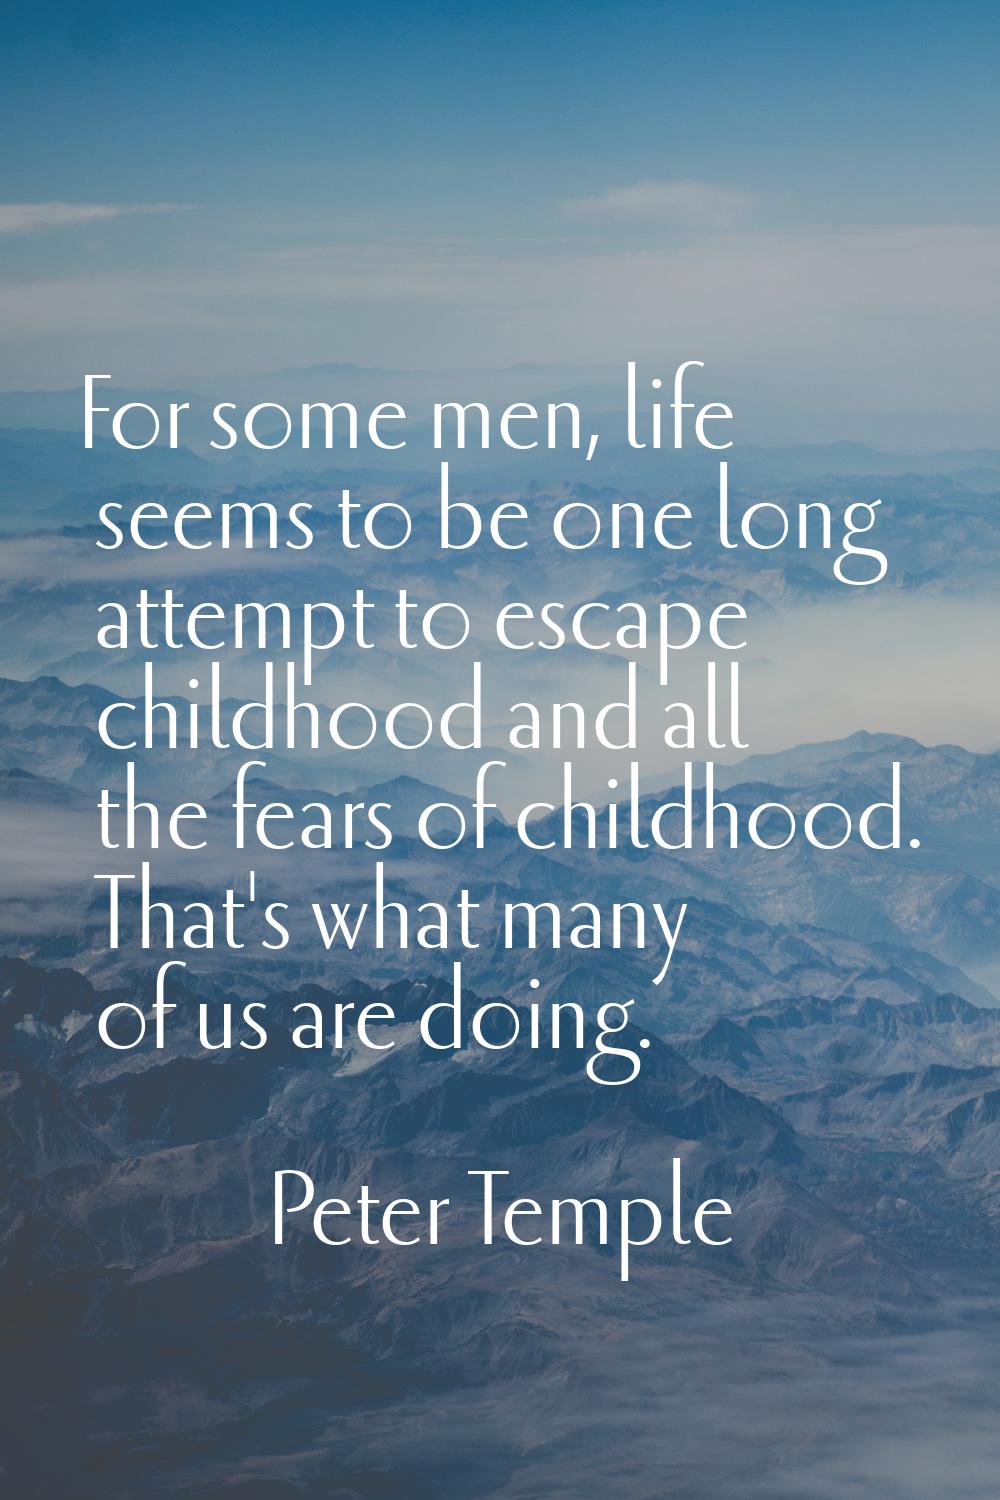 For some men, life seems to be one long attempt to escape childhood and all the fears of childhood.